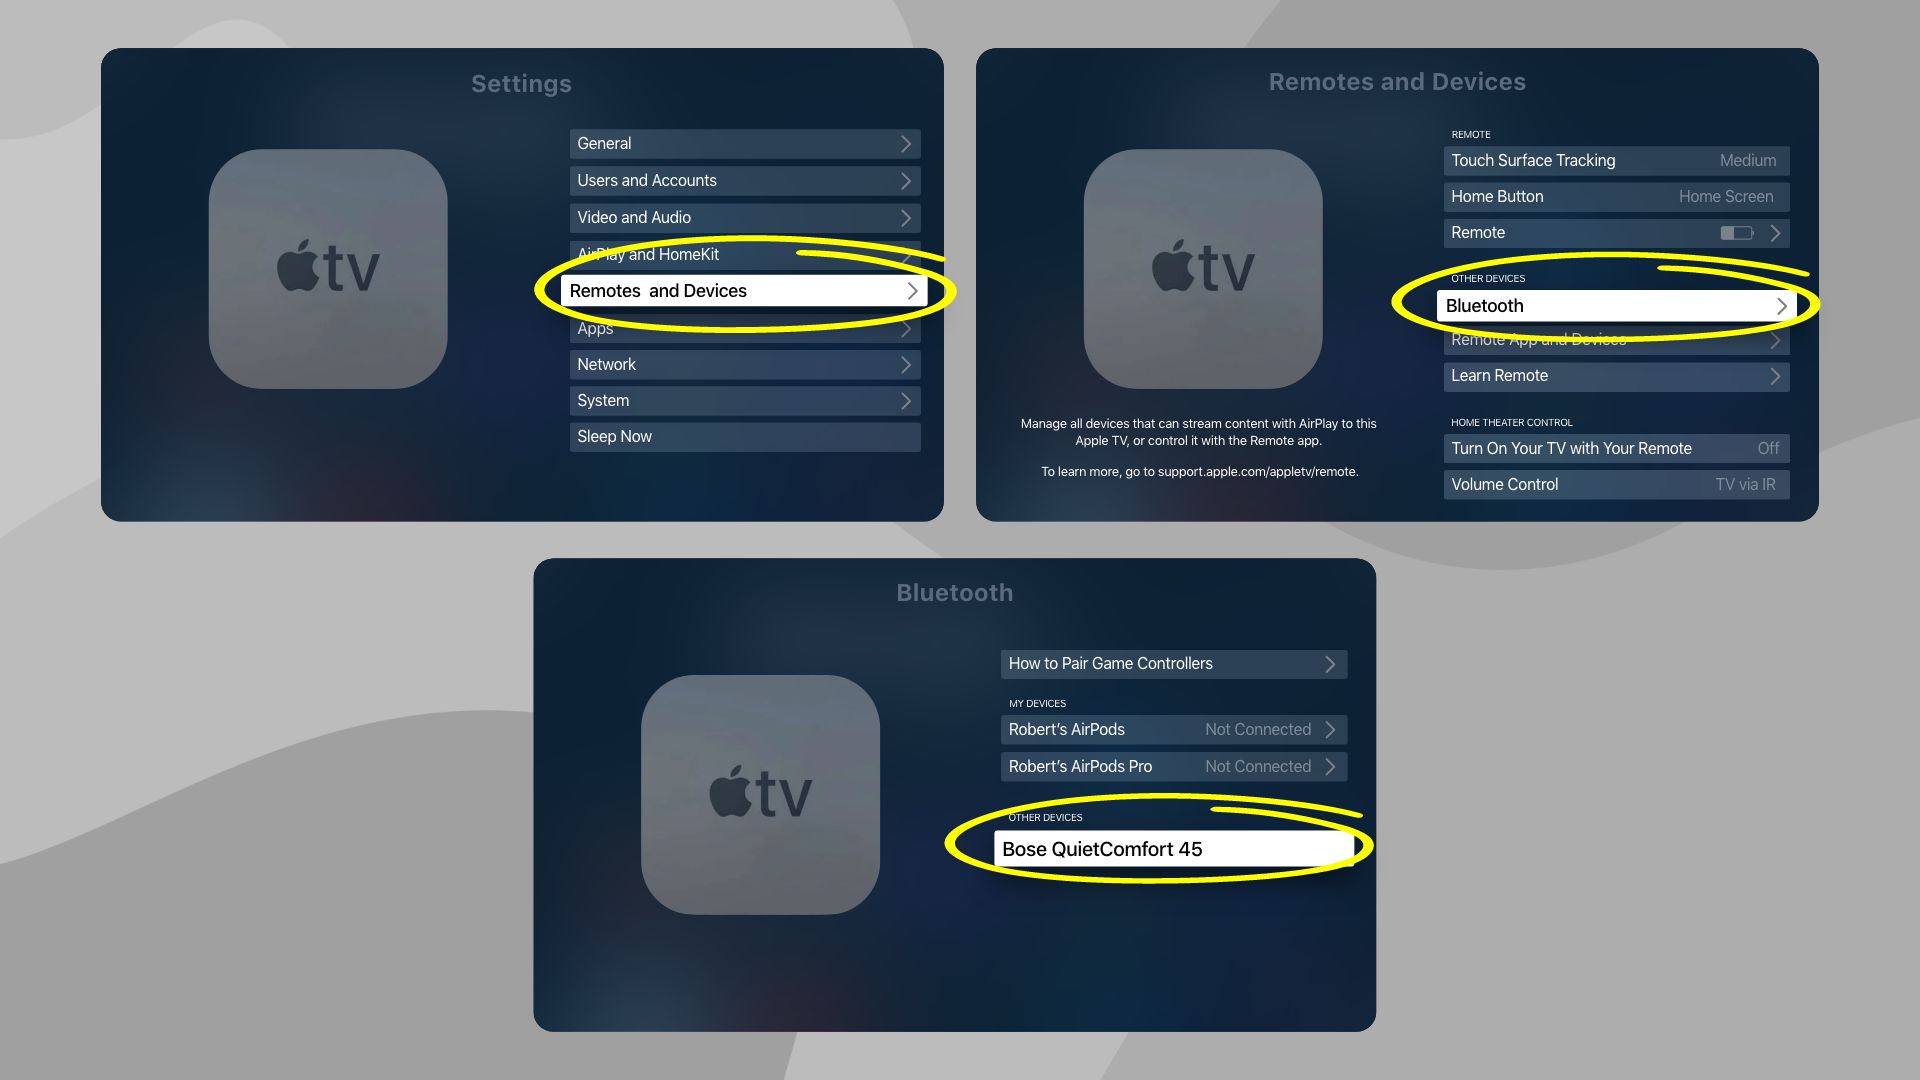 Here is how to quickly connect Bluetooth headphones to Apple TV